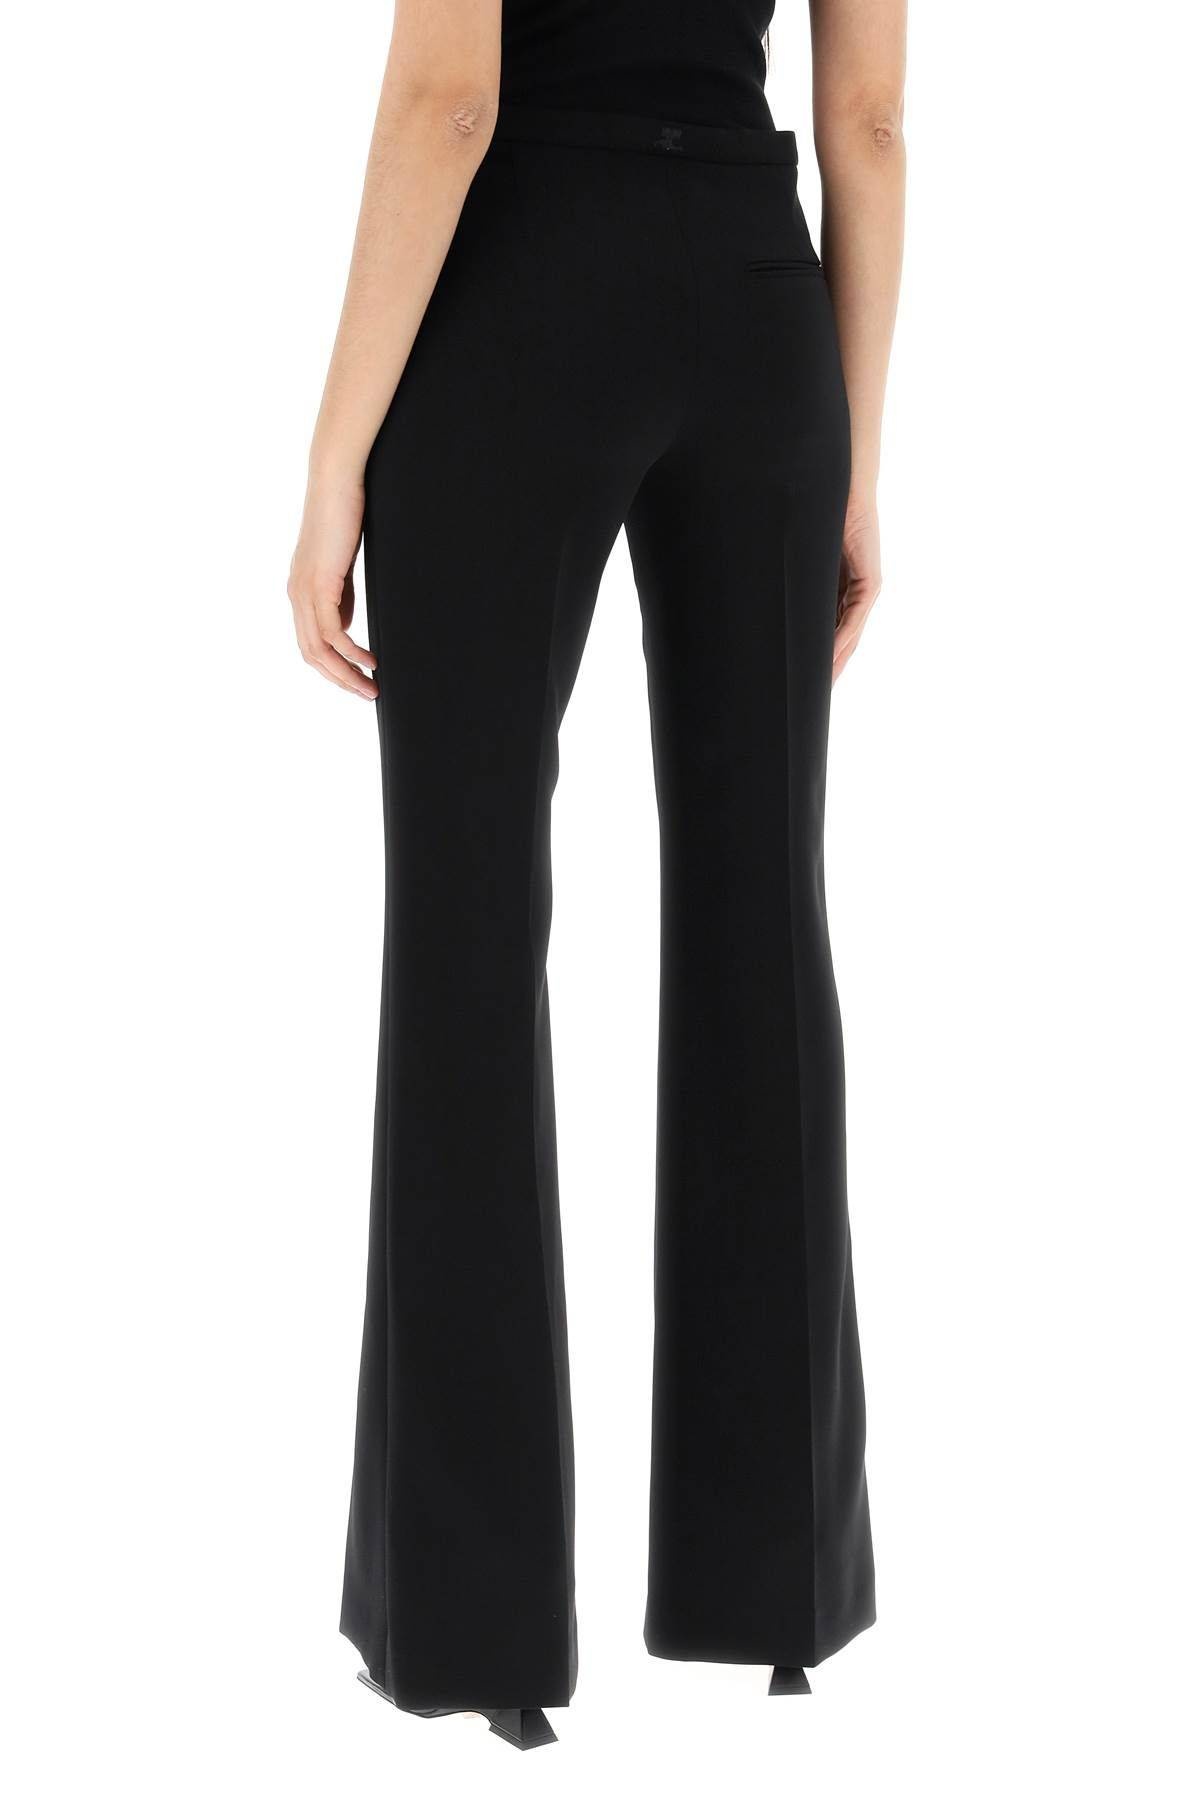 TAILORED BOOTCUT PANTS IN TECHNICAL JERSEY - 4